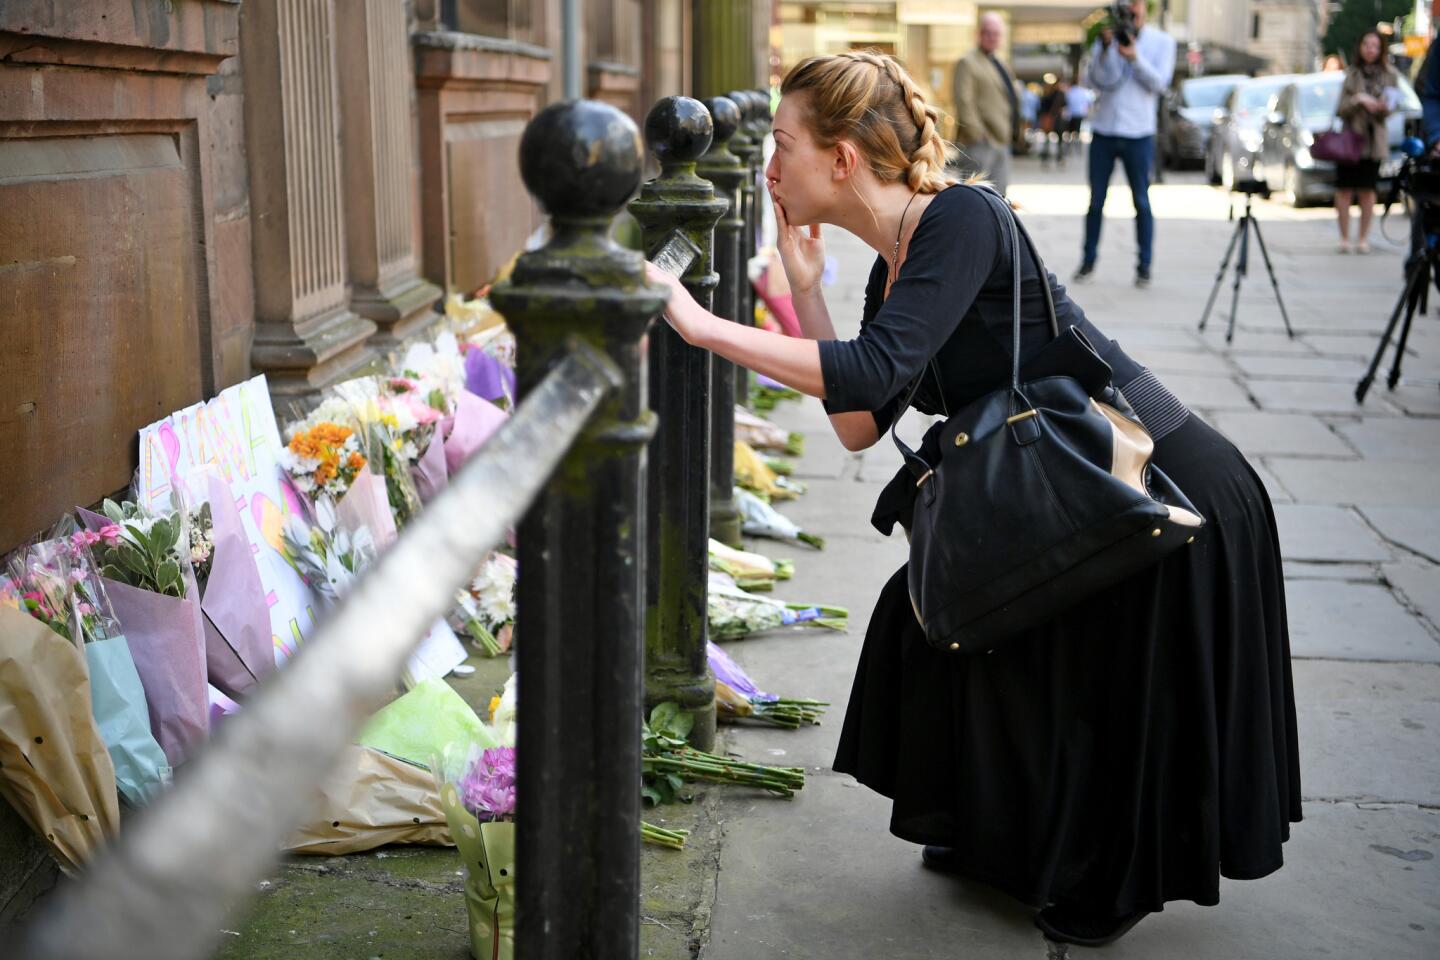 A woman pauses at a memorial in St. Ann Square on May 23, 2017, in Manchester, England, a day after 22 people were killed in a suicide bombing at a pop concert packed with children. It was the worst terror incident on British soil since the London bombings of 2005.